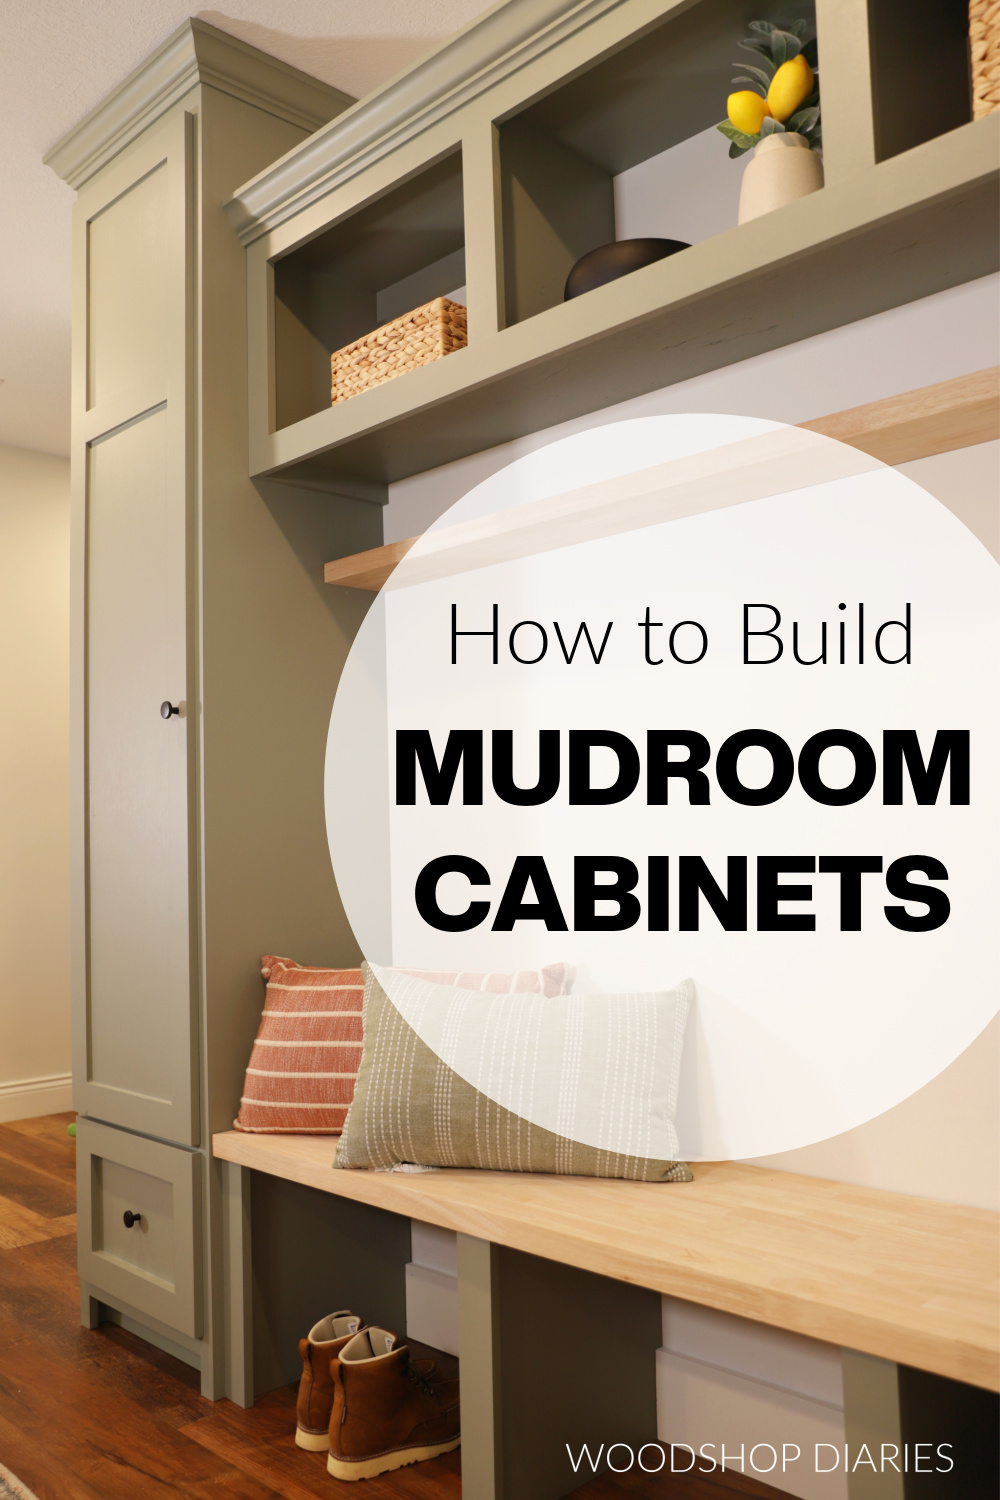 Vertical photo of mudroom built in cabinets for Pinterest with text "how to build mudroom cabinets"